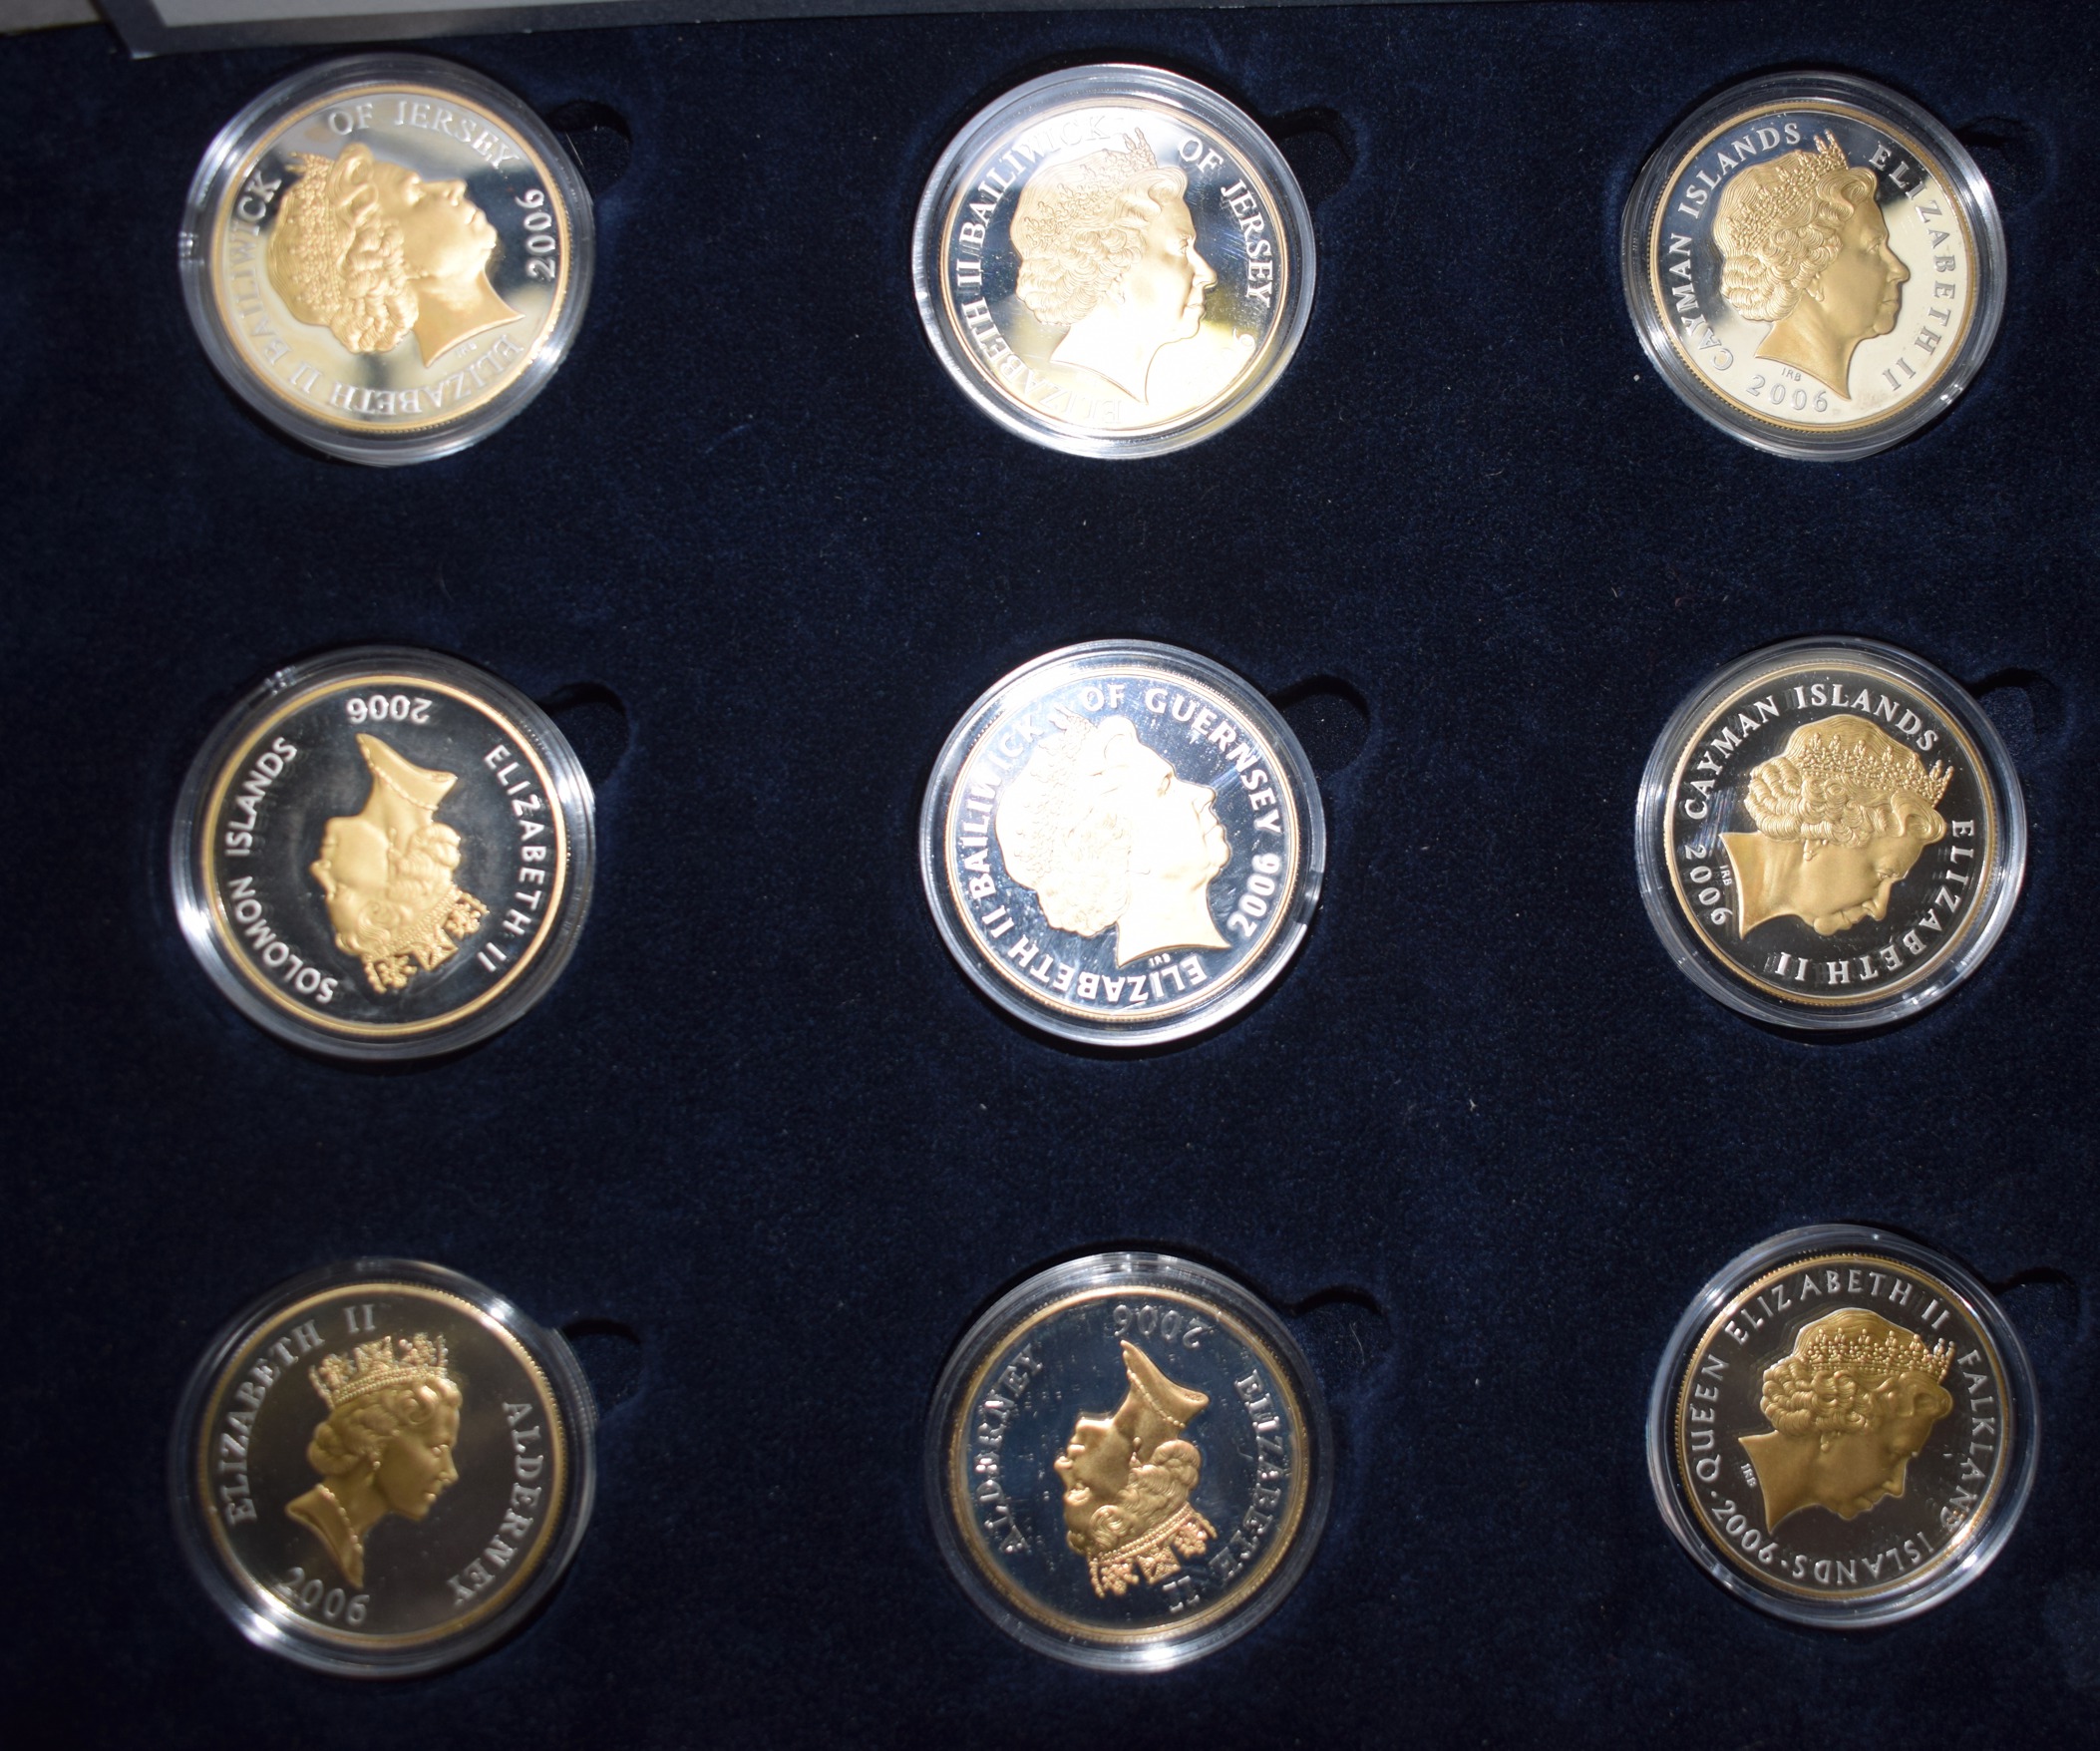 HER MAJESTY QUEEN ELIZABETH II SILVER PROOF COIN COLLECTION. - Image 2 of 3